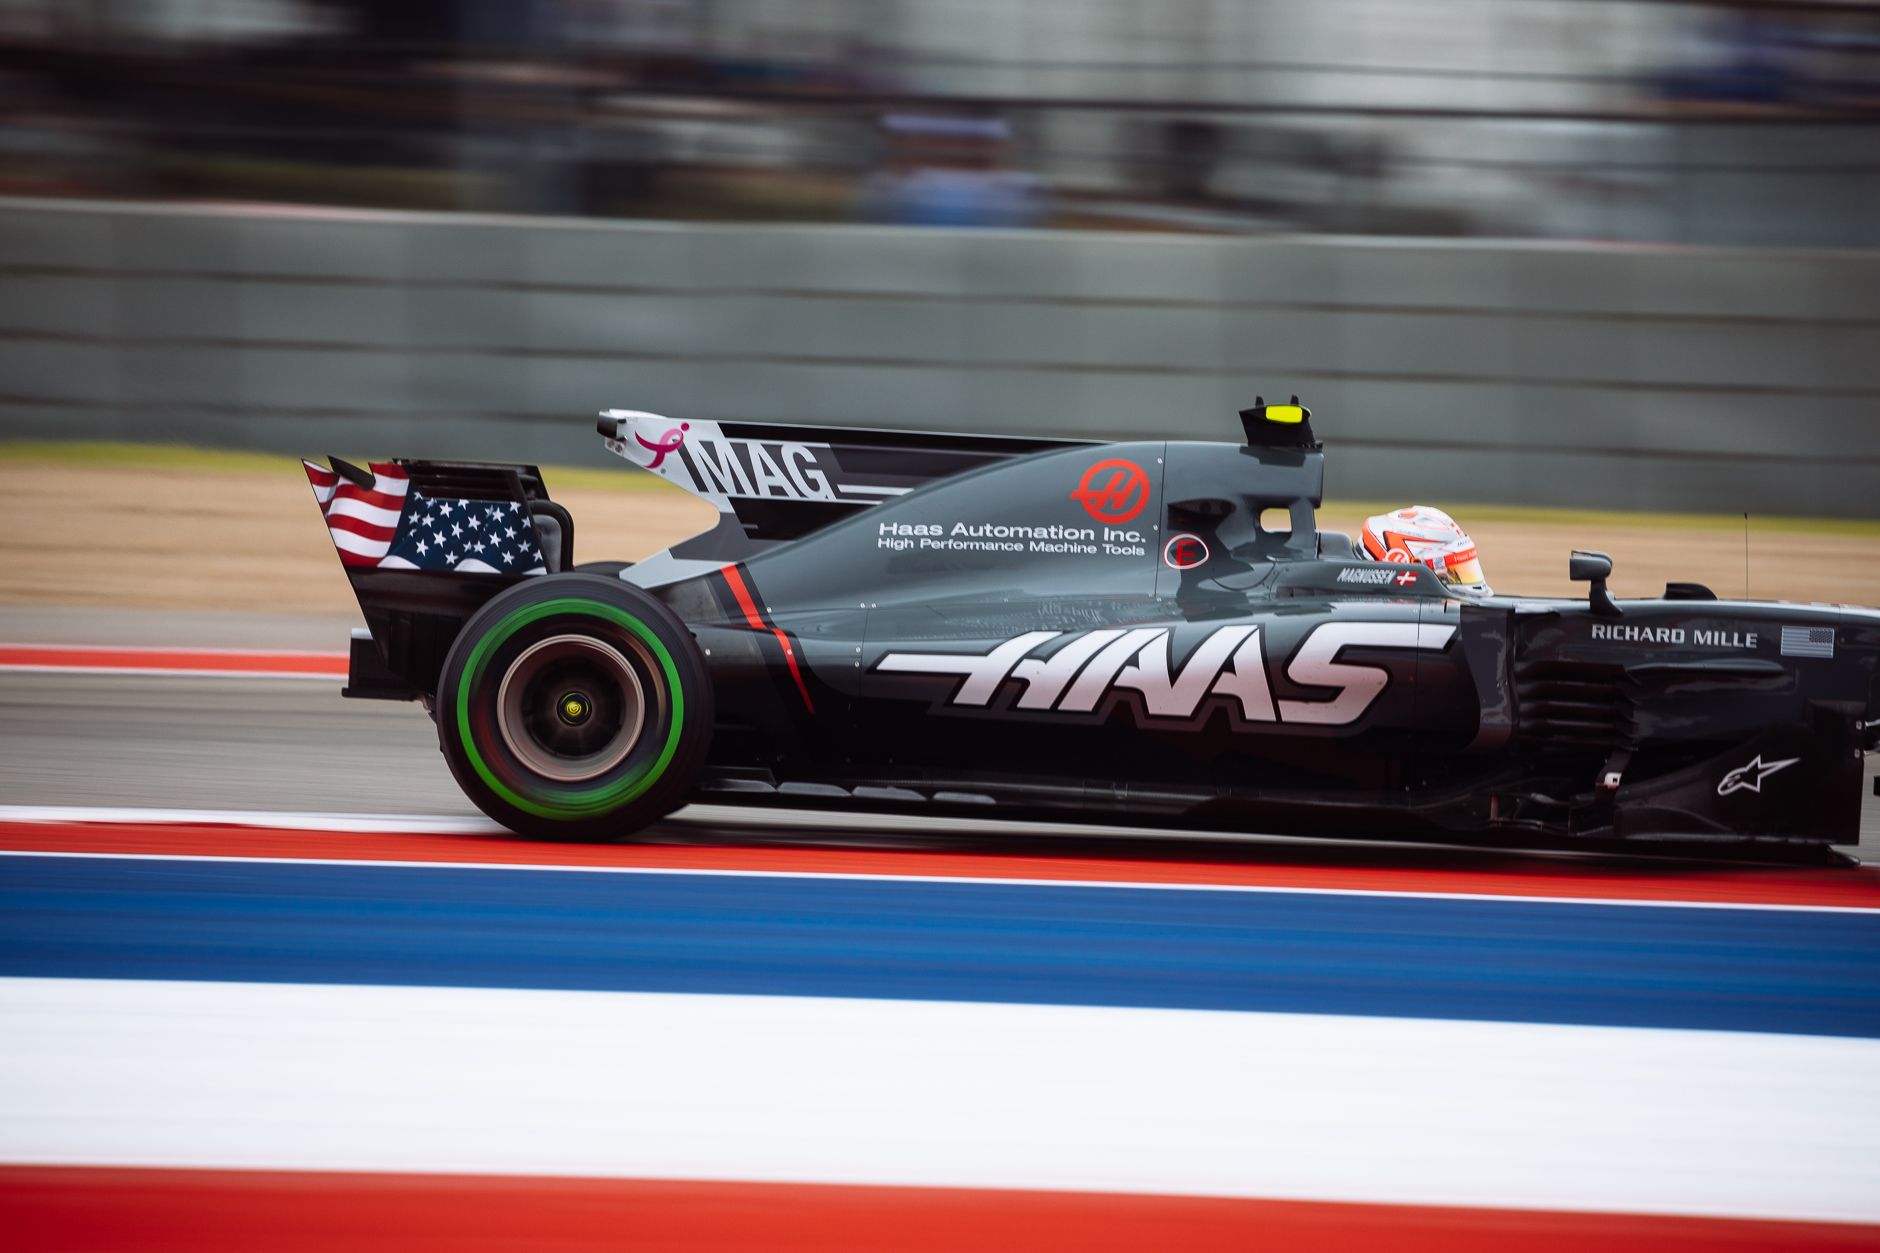 Haas F1 brought a special livery addition to the U.S. Grand Prix in the form of the stars-and-stripes on the sides of the spoiler. Haas F1 is the sole U.S. based team competing in Formula 1.